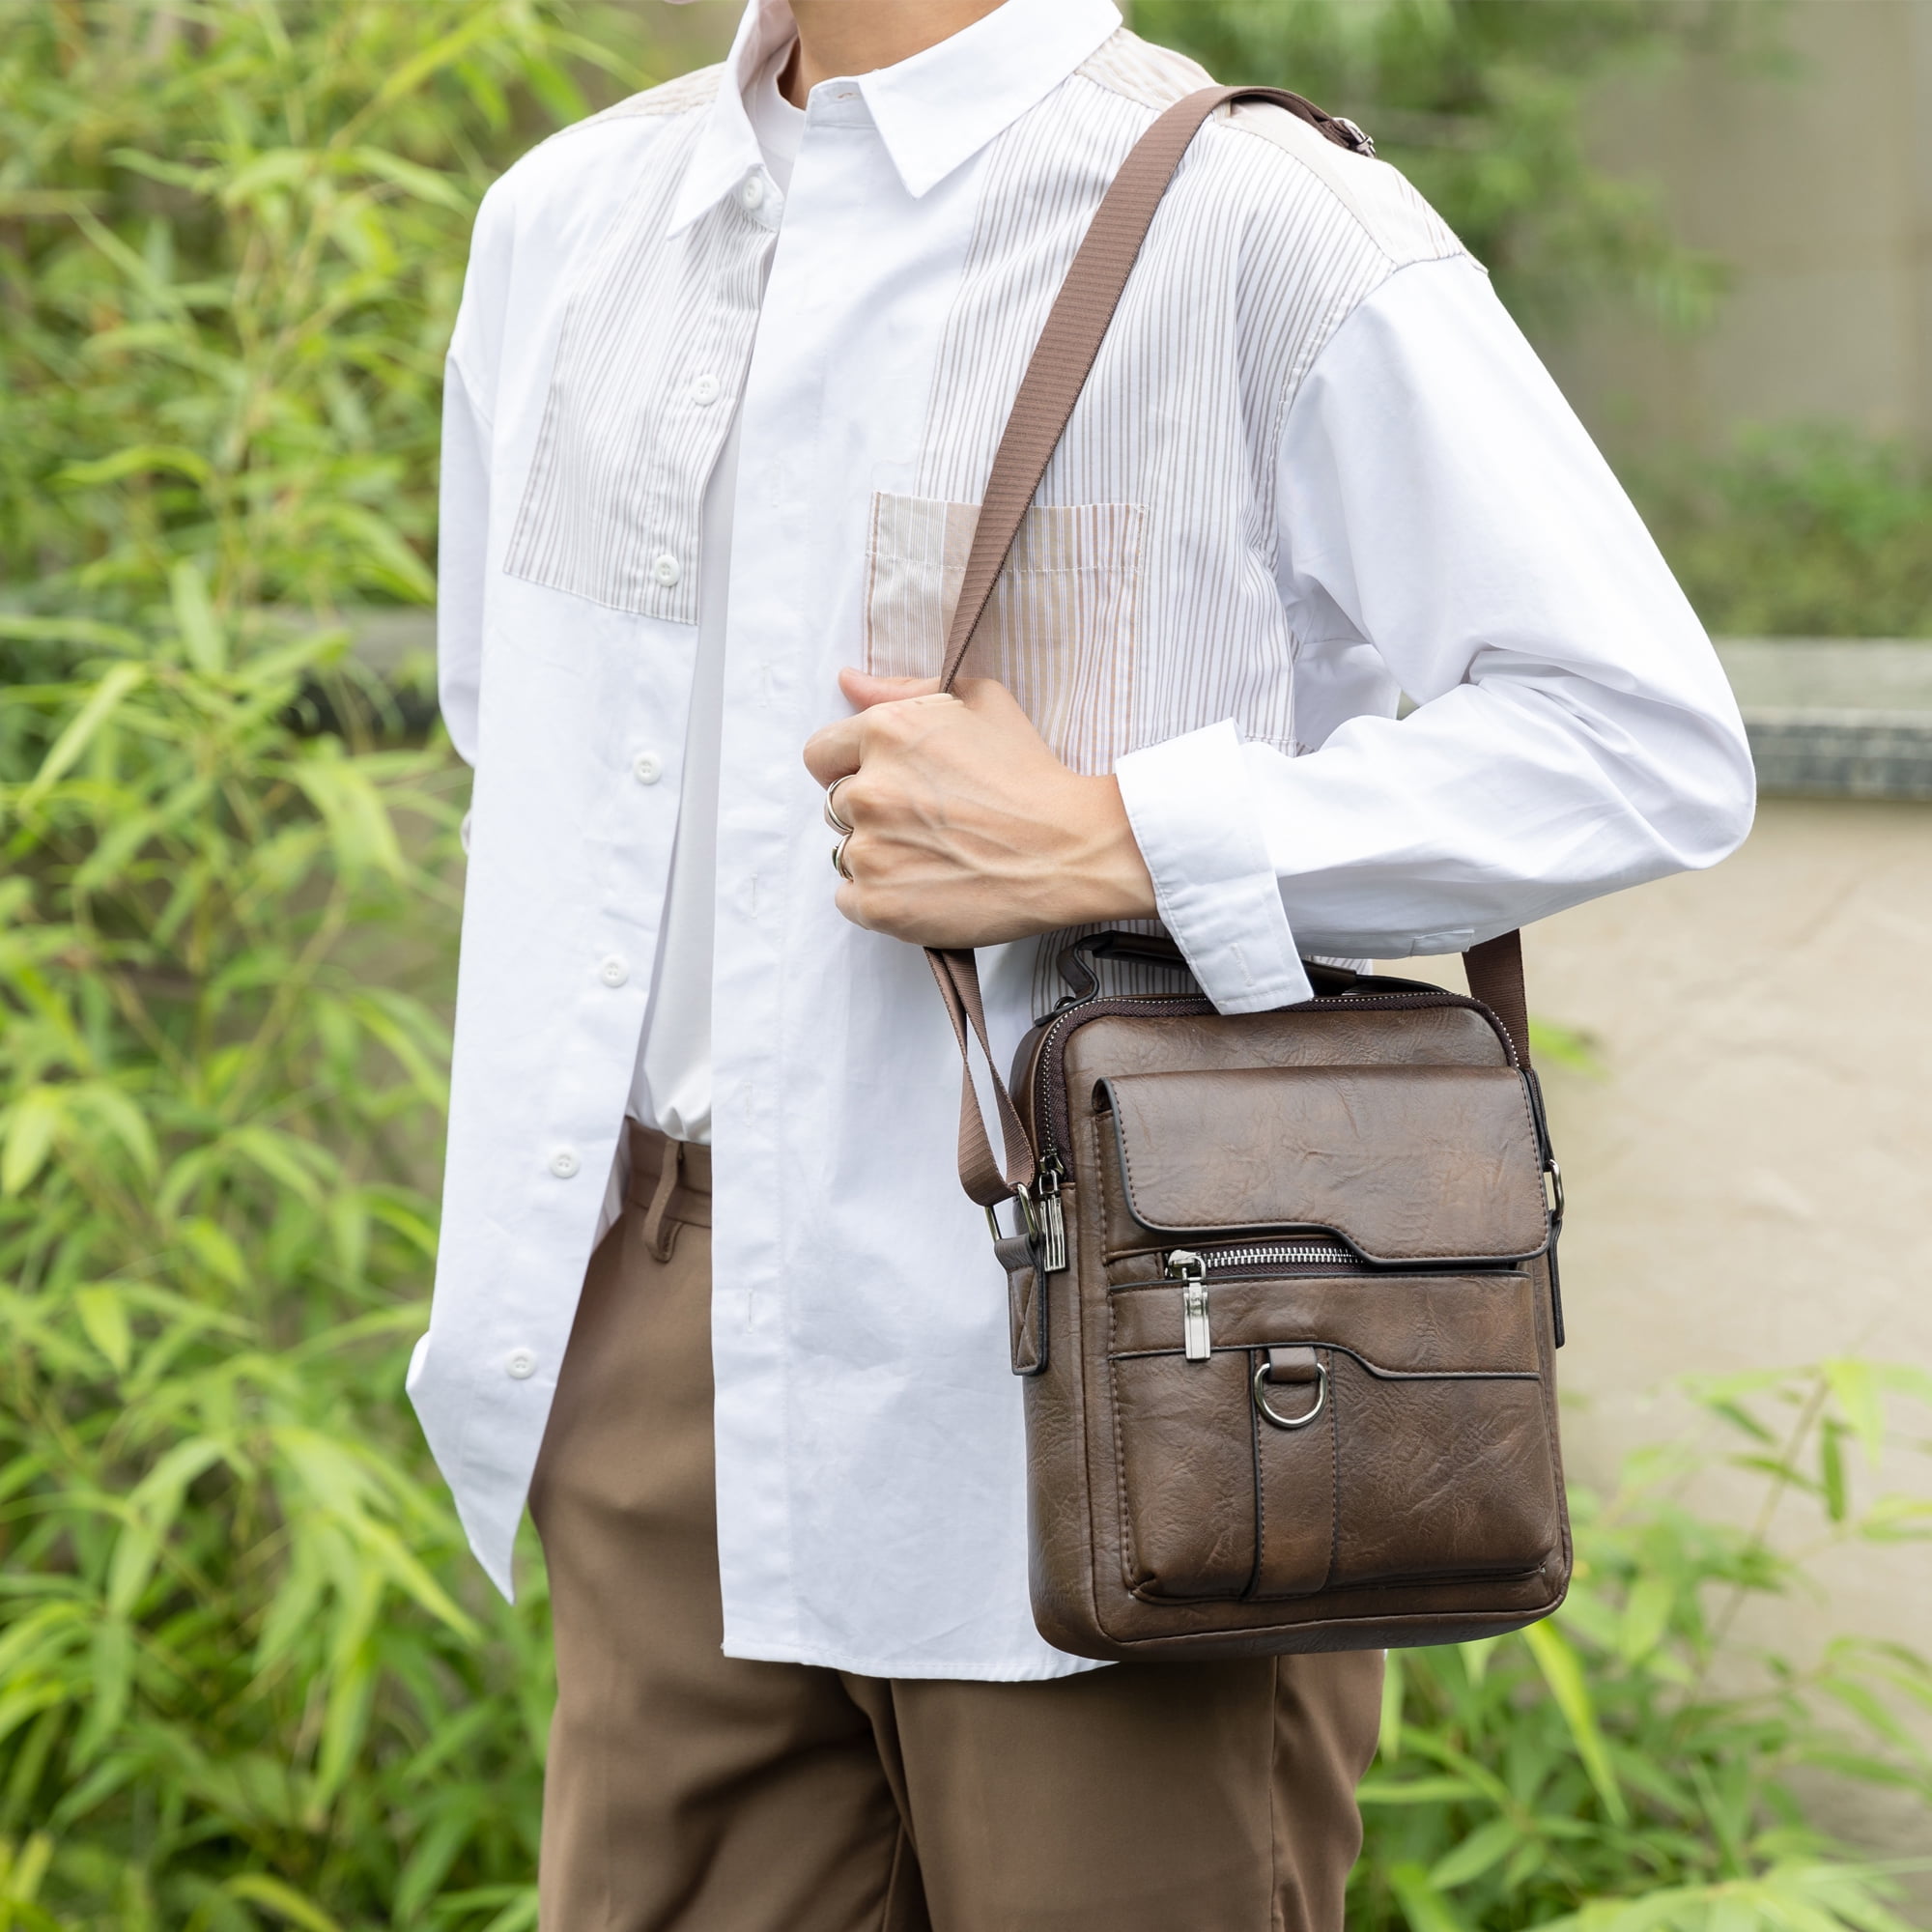 WEIXIER Small Shoulder Bag for Men Leather Crossbody Man Purse Handbag  Satchel Messenger Travel Bags for iPad 9.7 Work Office Business Brown NEW  for Sale in Des Plaines, IL - OfferUp